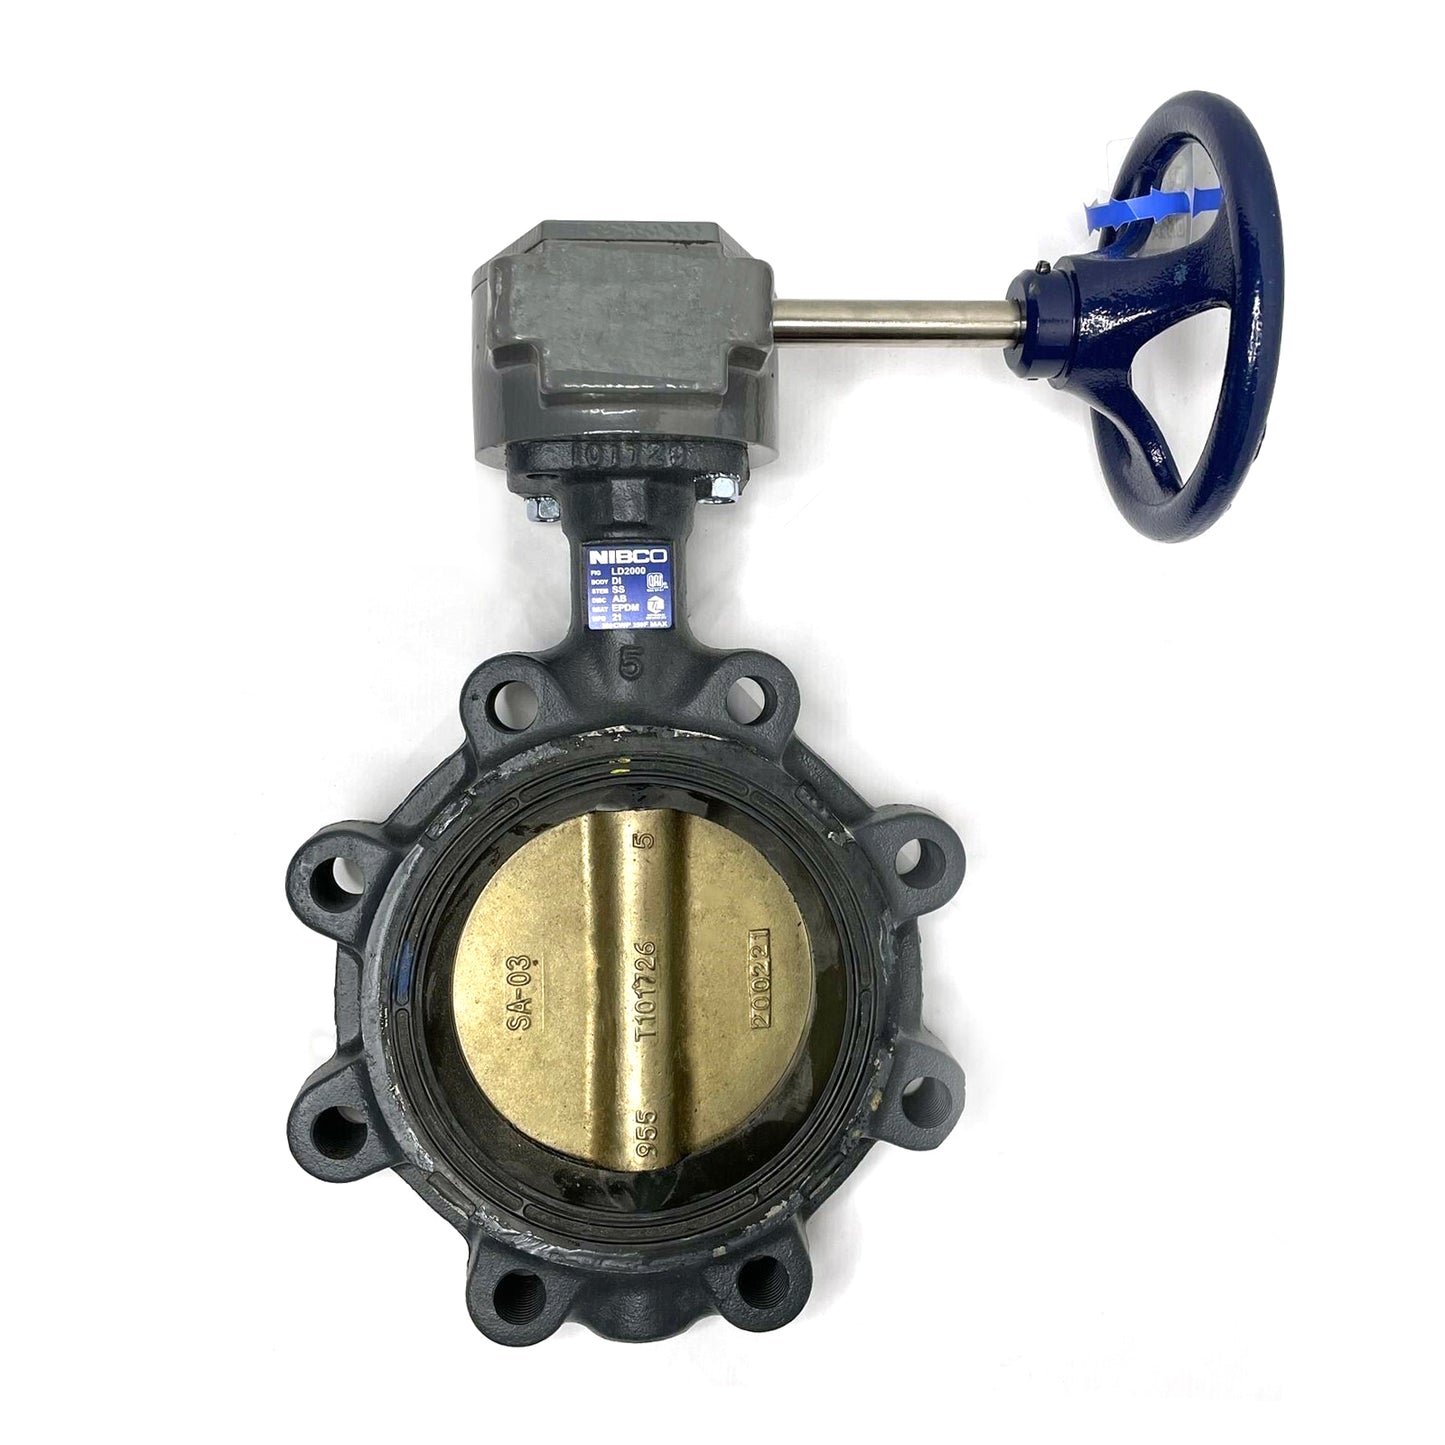 NLG110H - LD-2000 Ductile Iron Lug Type Butterfly Valve - Gear Operator - 4"